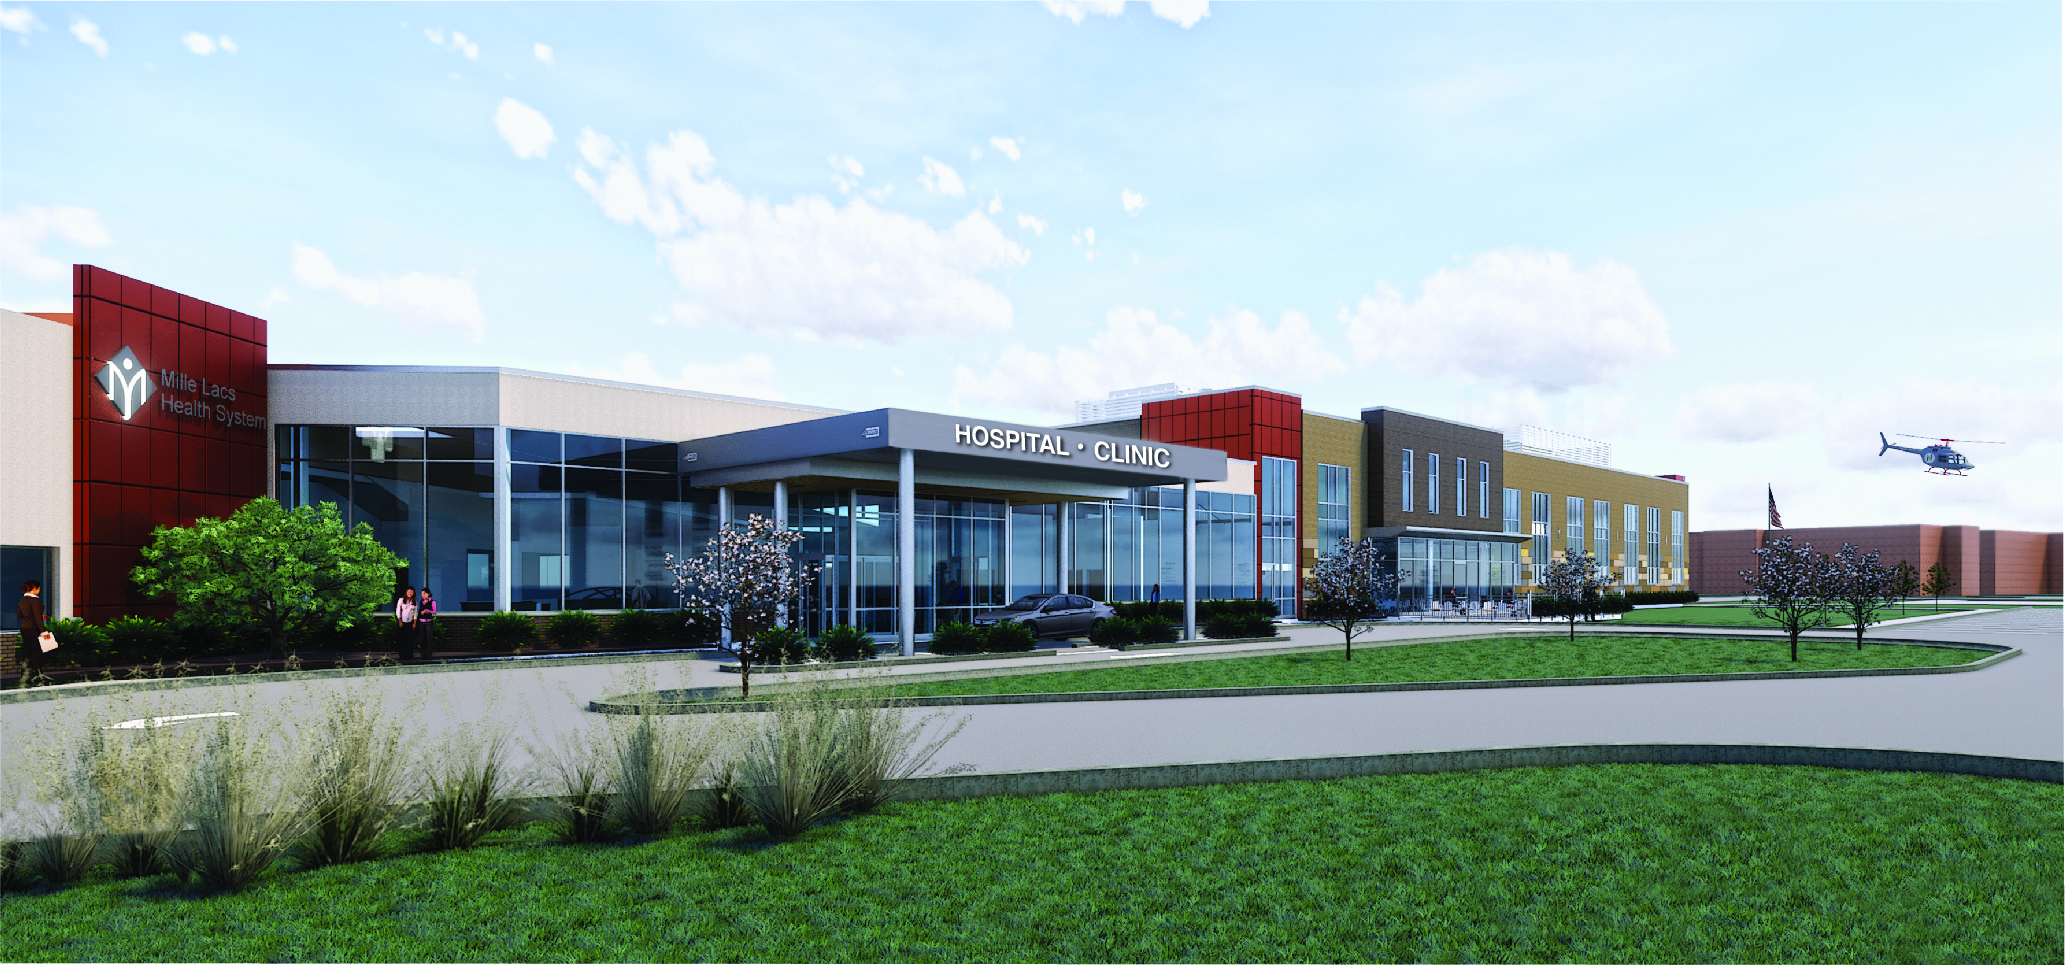 Rendered image of the entrance of the newly-built MLHS facility